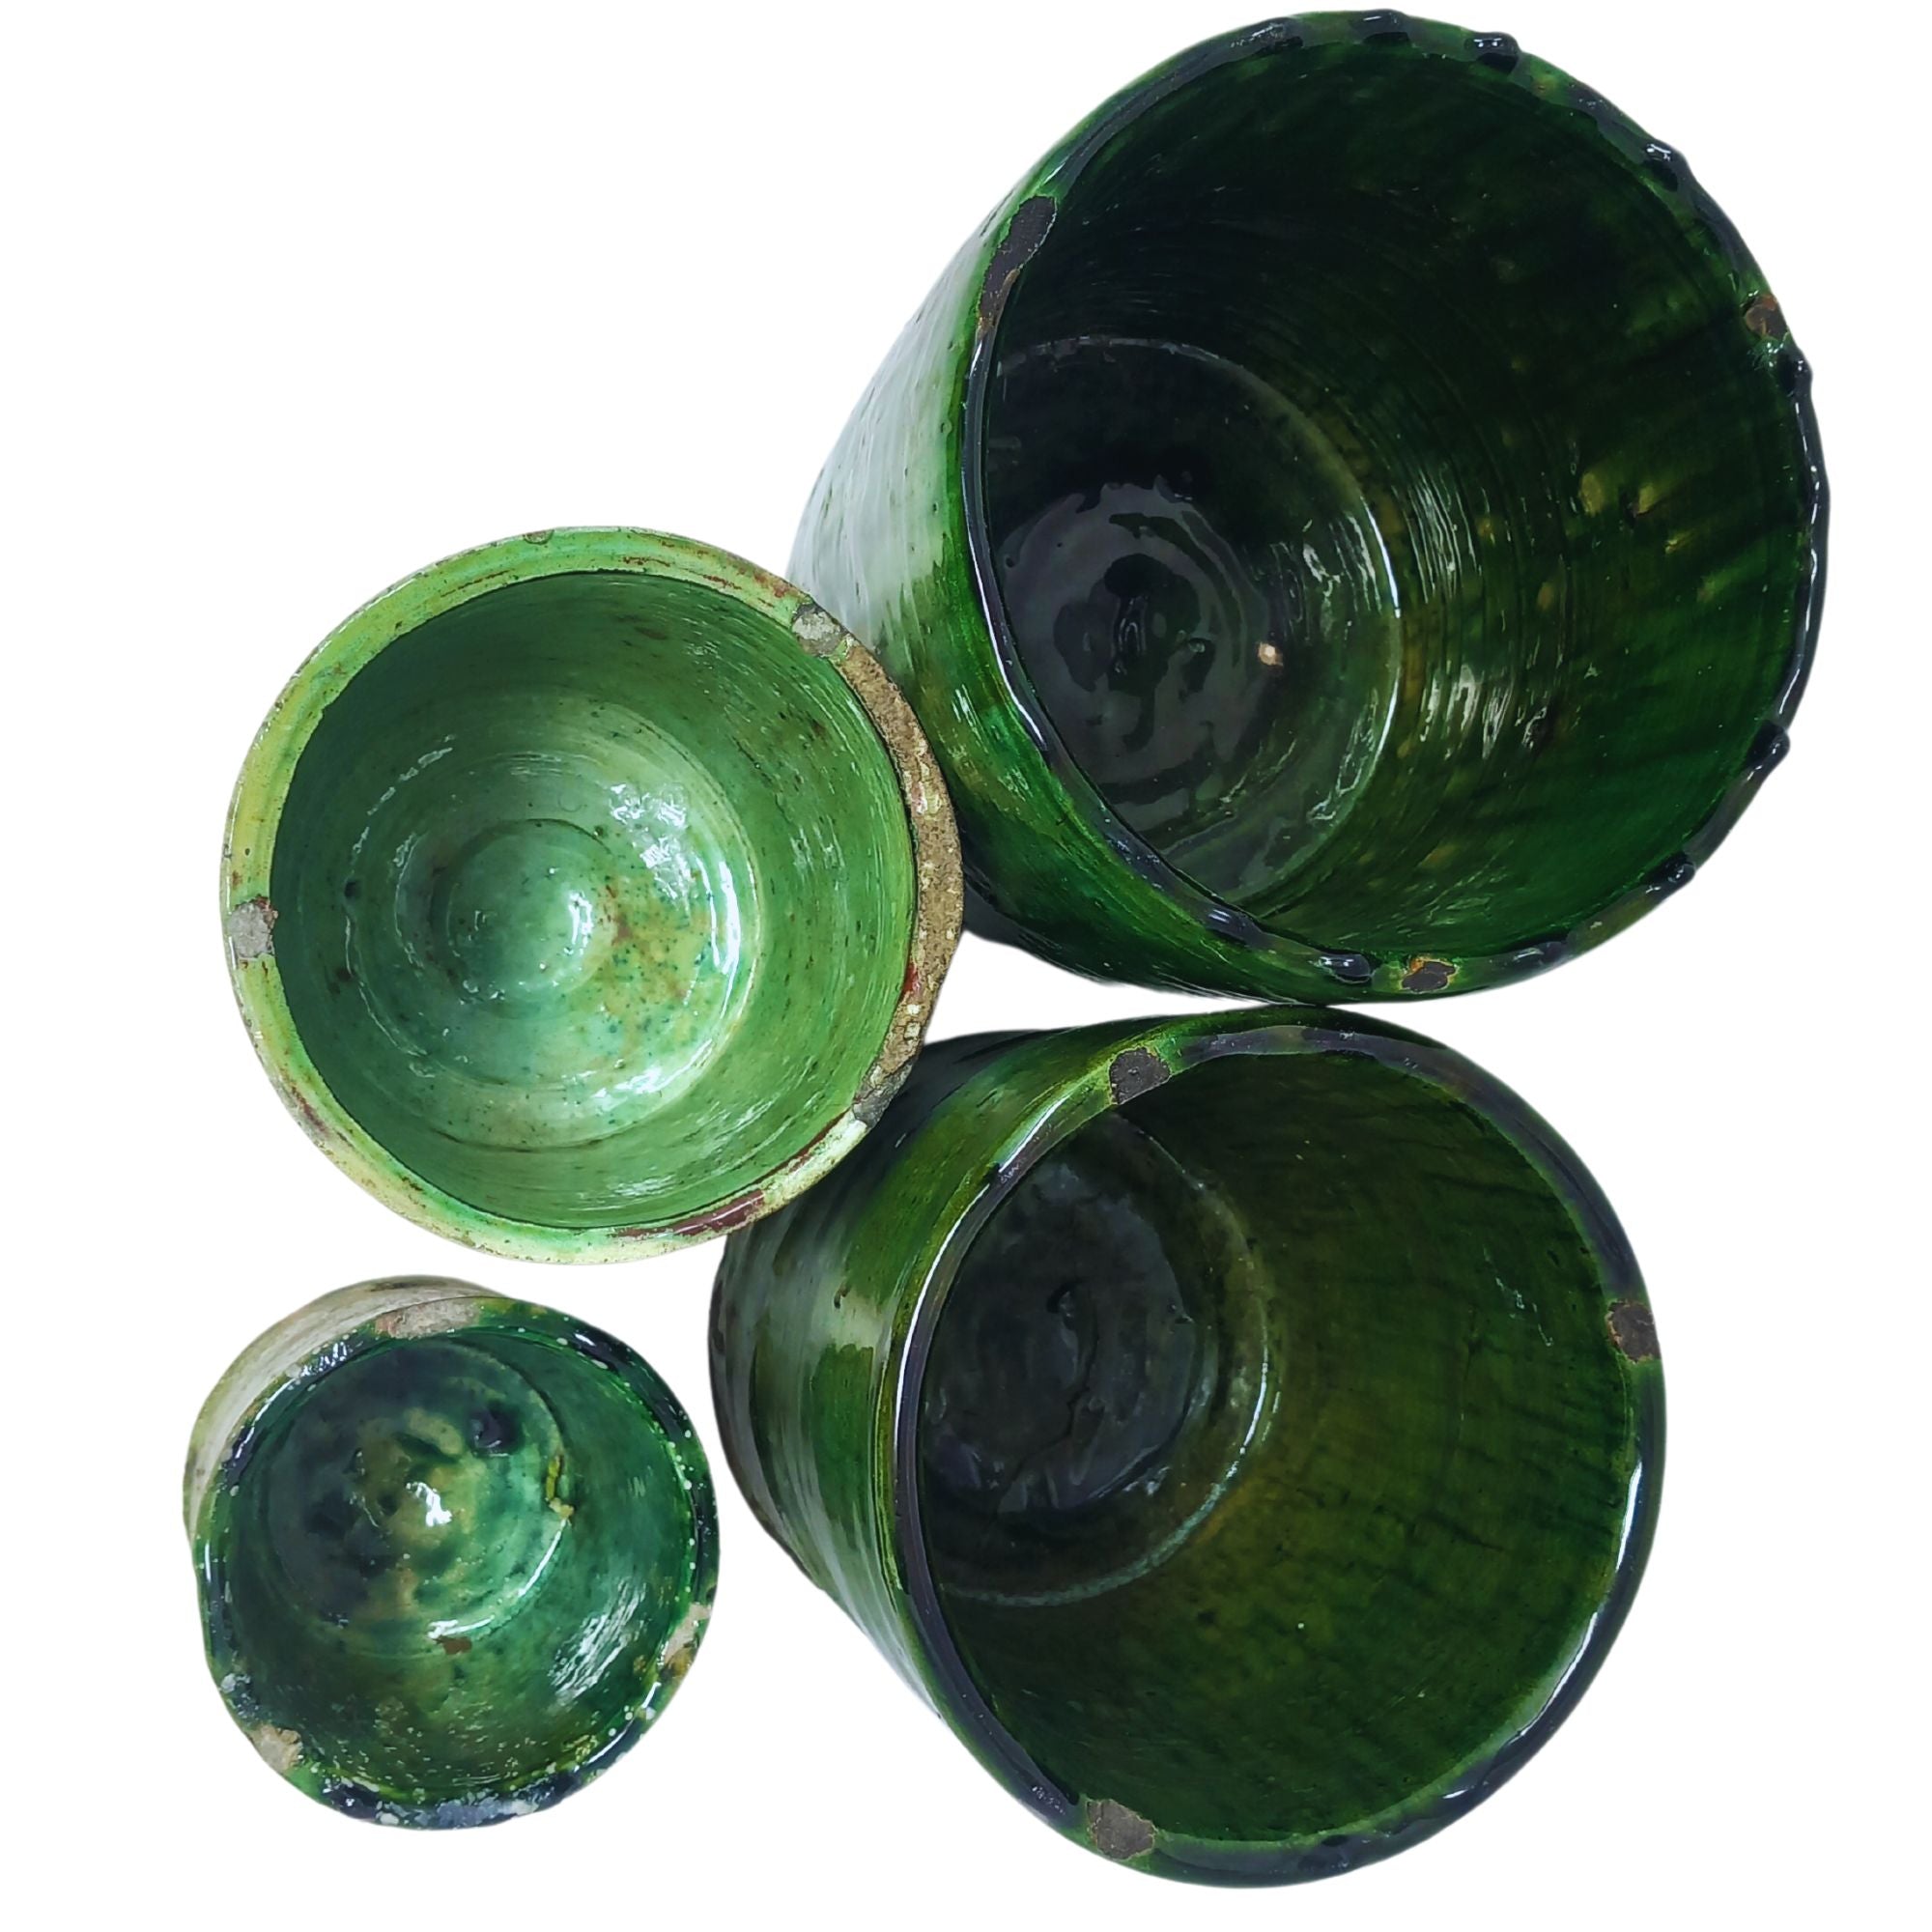 picture of four different sizes of tamegroute pots in dark green hues top view